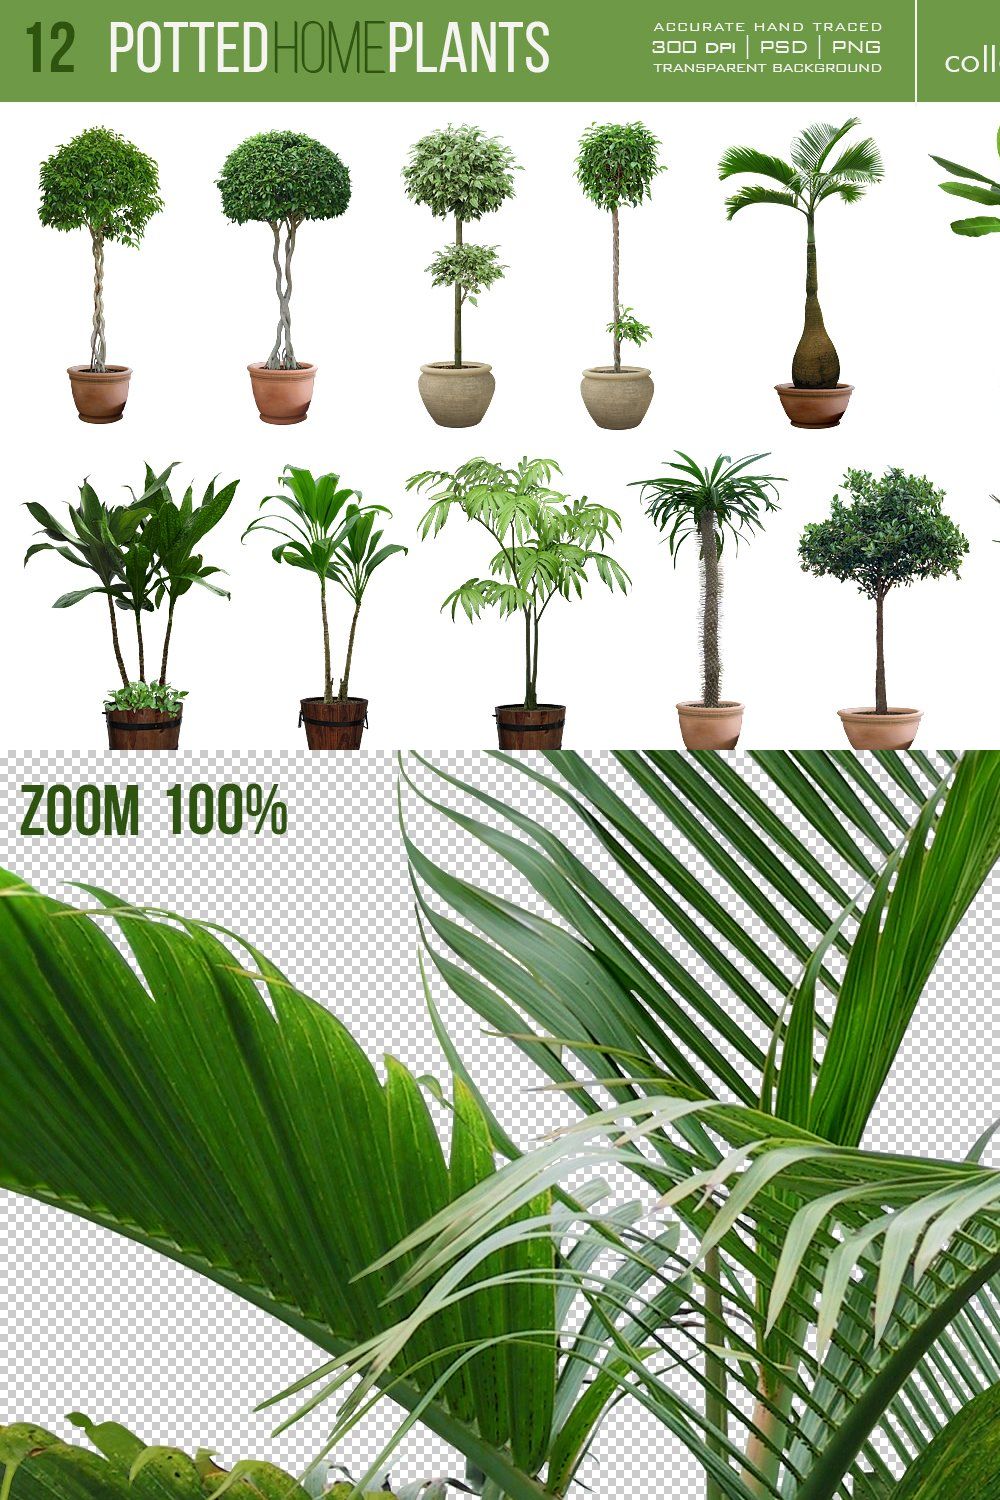 12 Potted Home Plants vol.4 pinterest preview image.